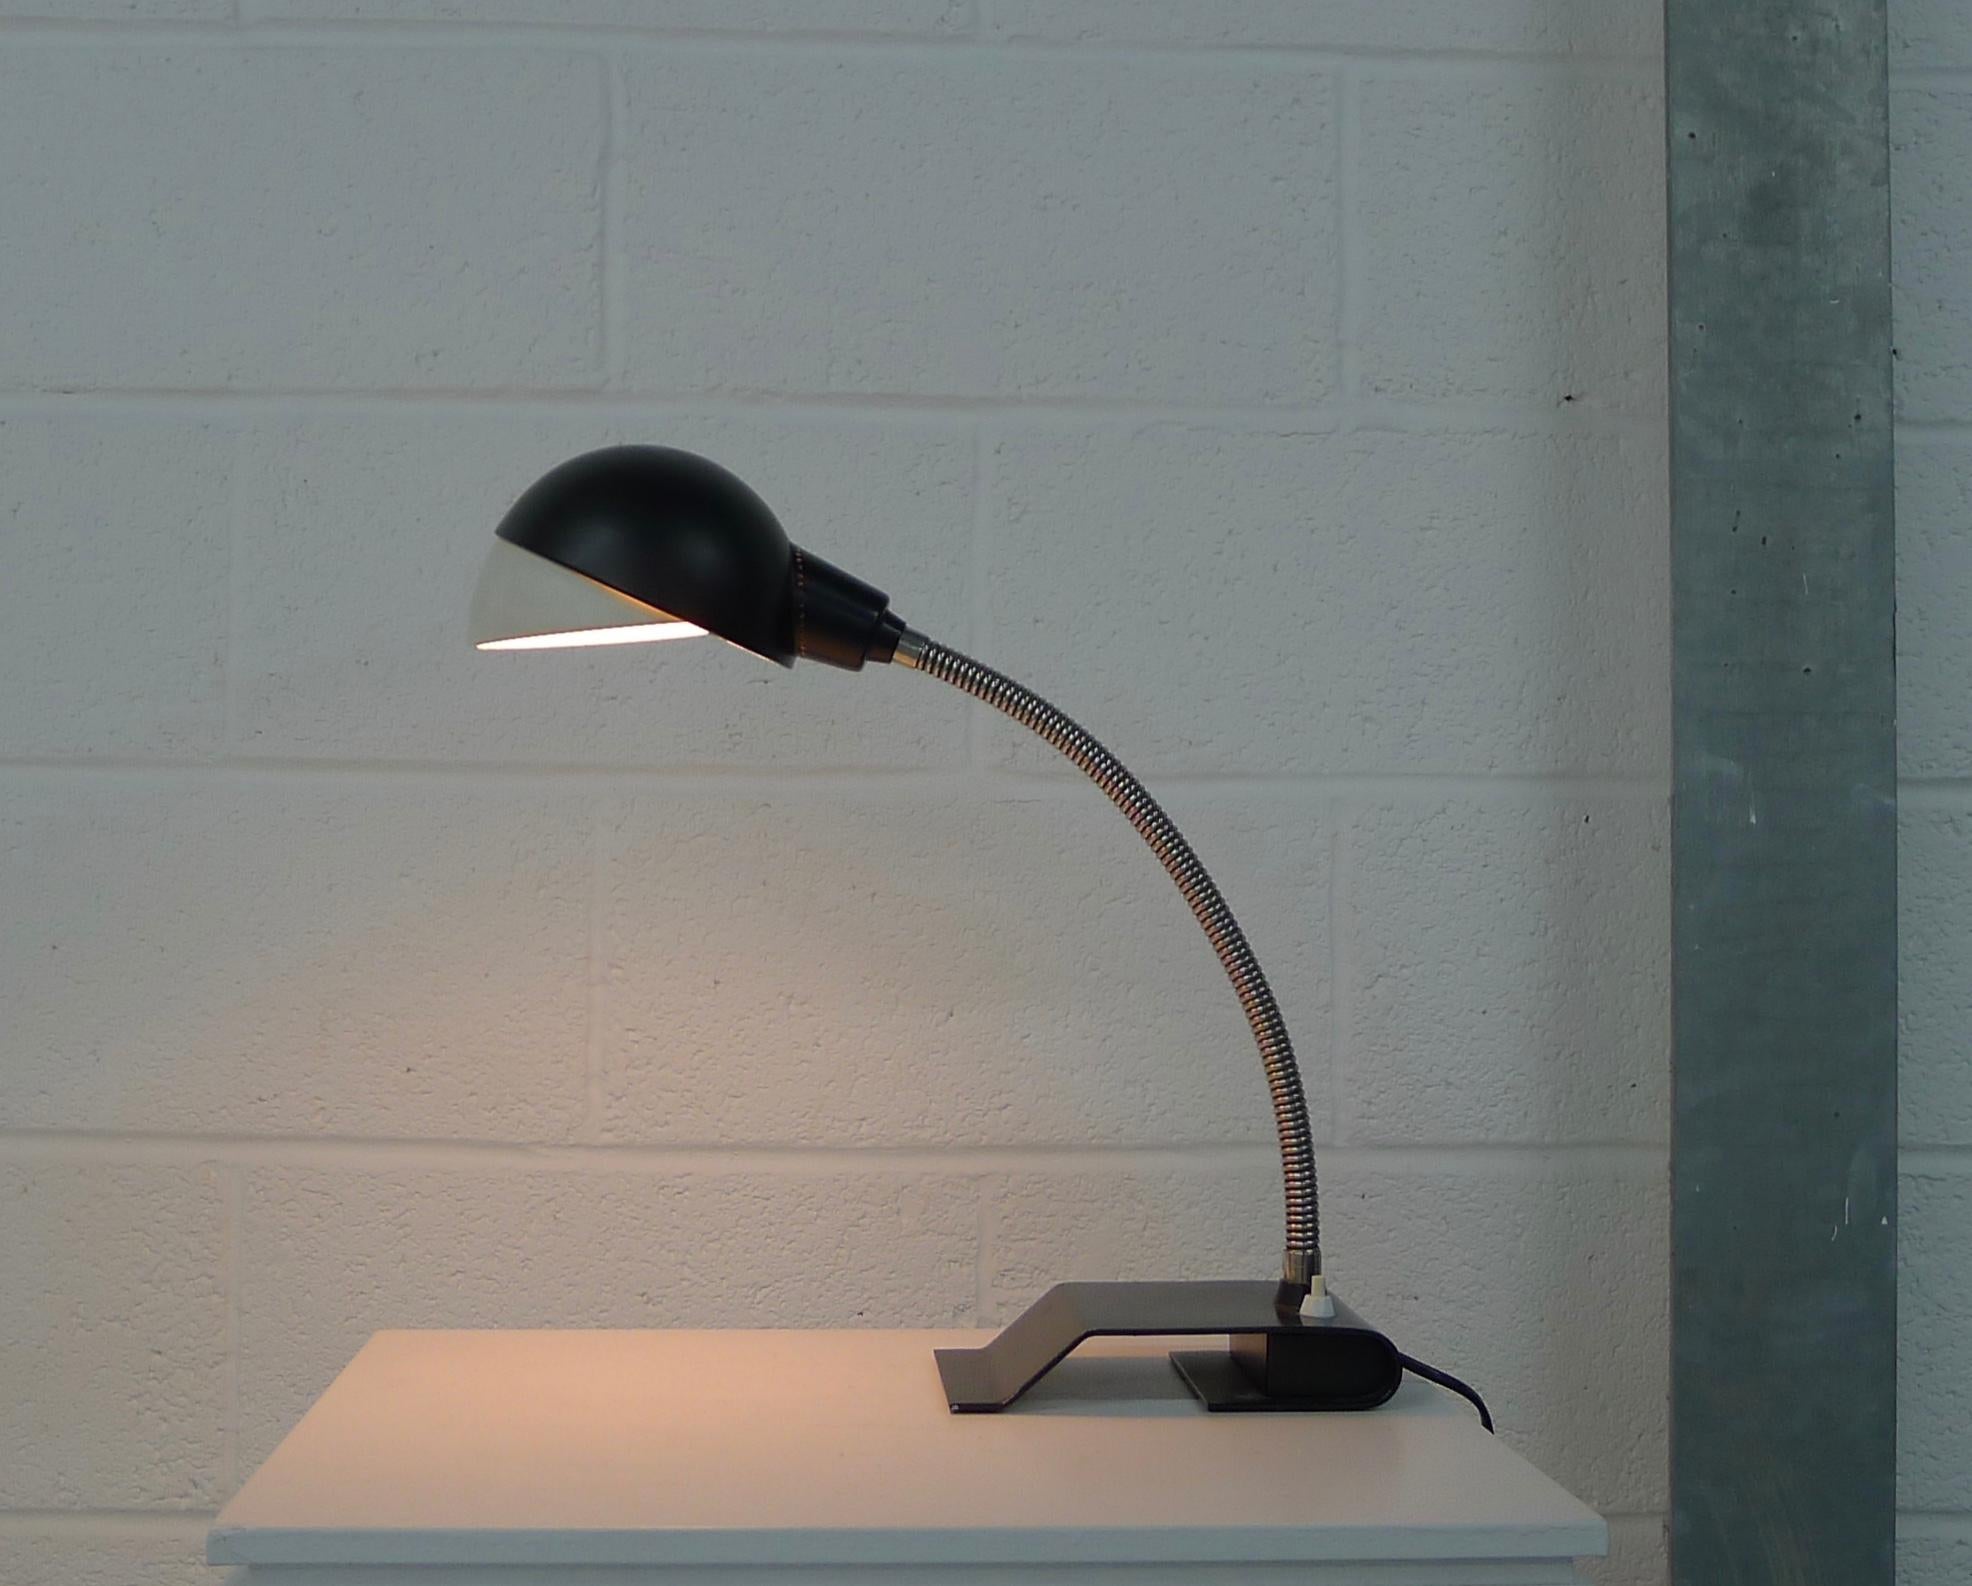 Alvar Aalto table / desk light designed 1957 for Valaistustyo, Finland. Enameled steel black base and shade with contrasting white visor. Goose neck arm for shade orientation.

Stamped to base as shown, this is an original example by the first